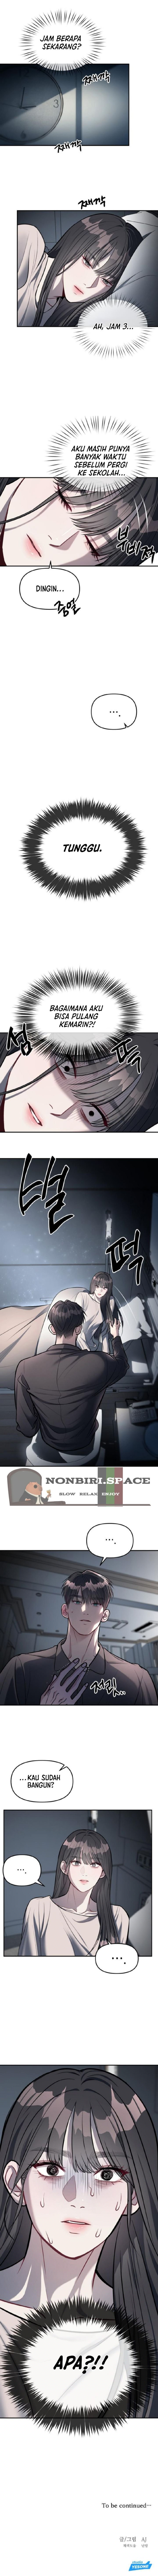 Undercover! Chaebol High School Chapter 16 - 99